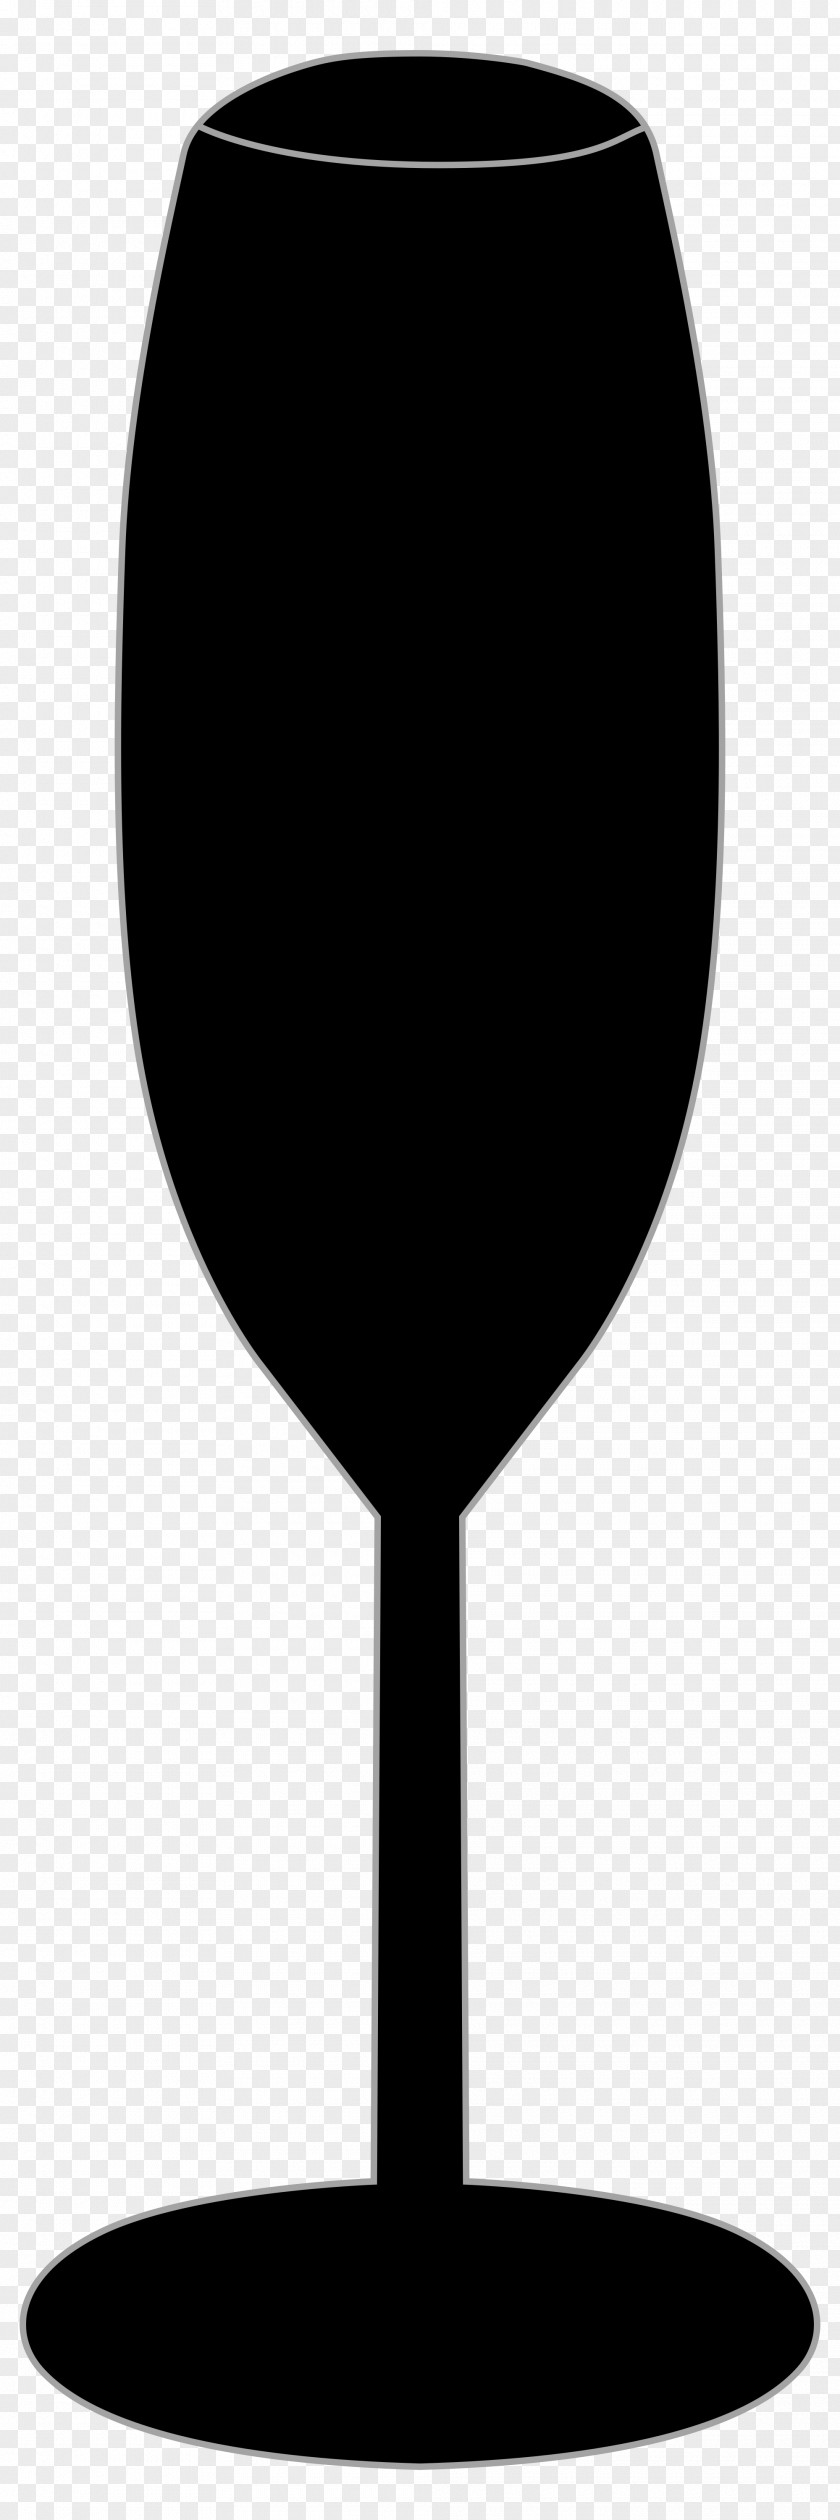 Champagne Wine Glass Stemware Table-glass PNG